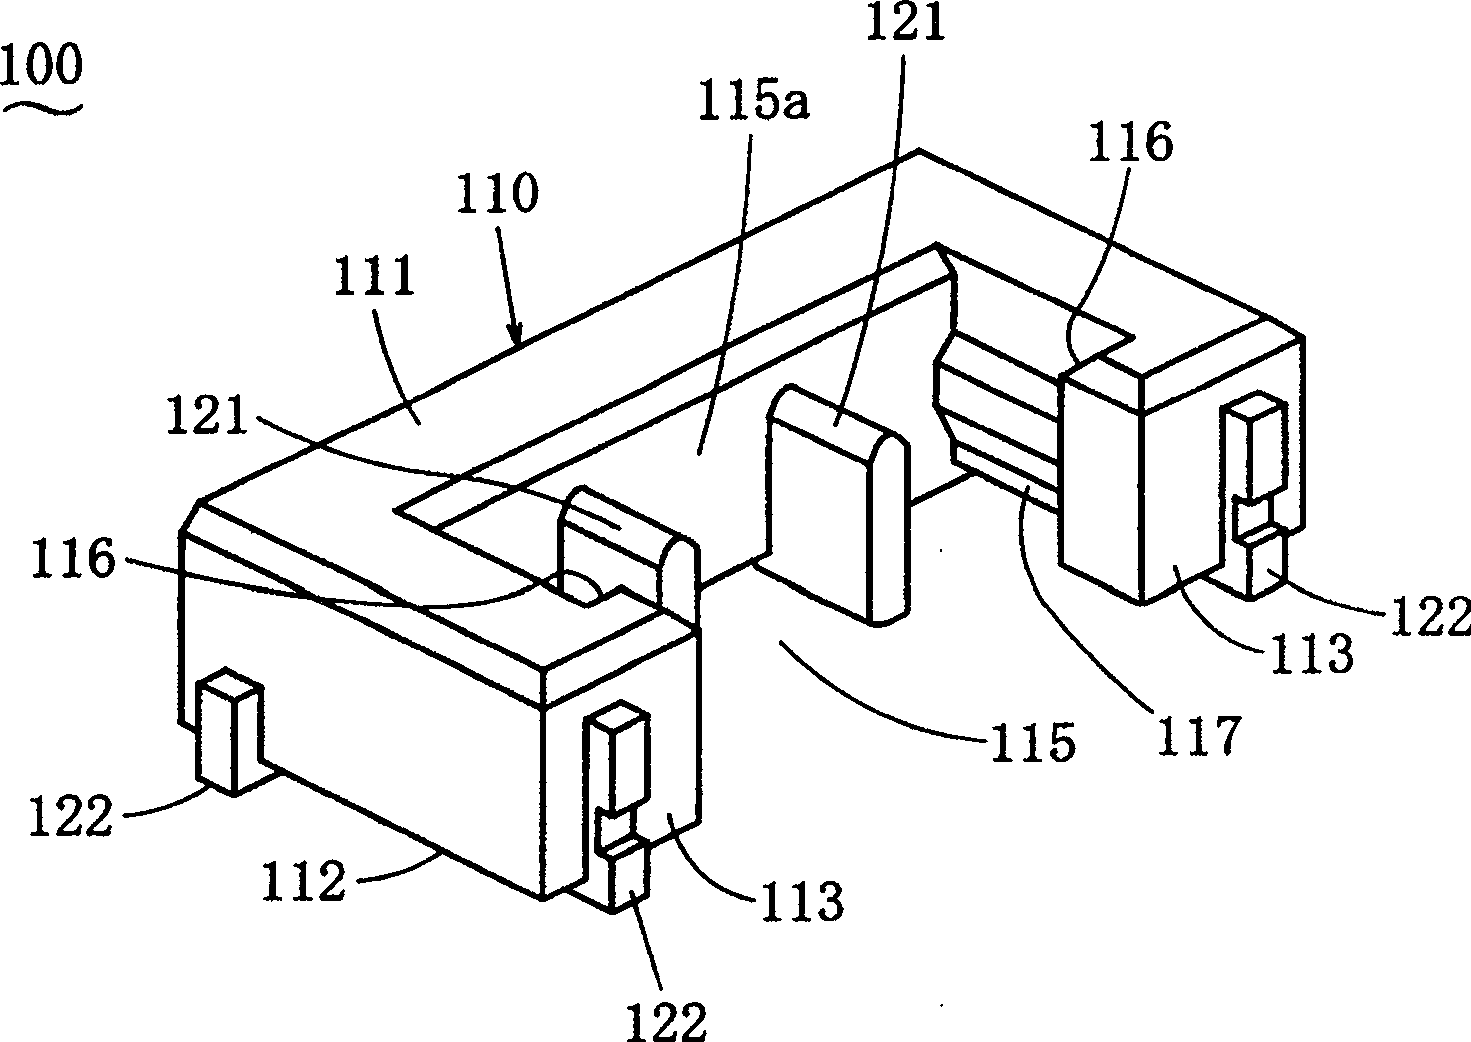 Multiconnection plug connector and longitudinally laminated and laterally laminated socket connectors